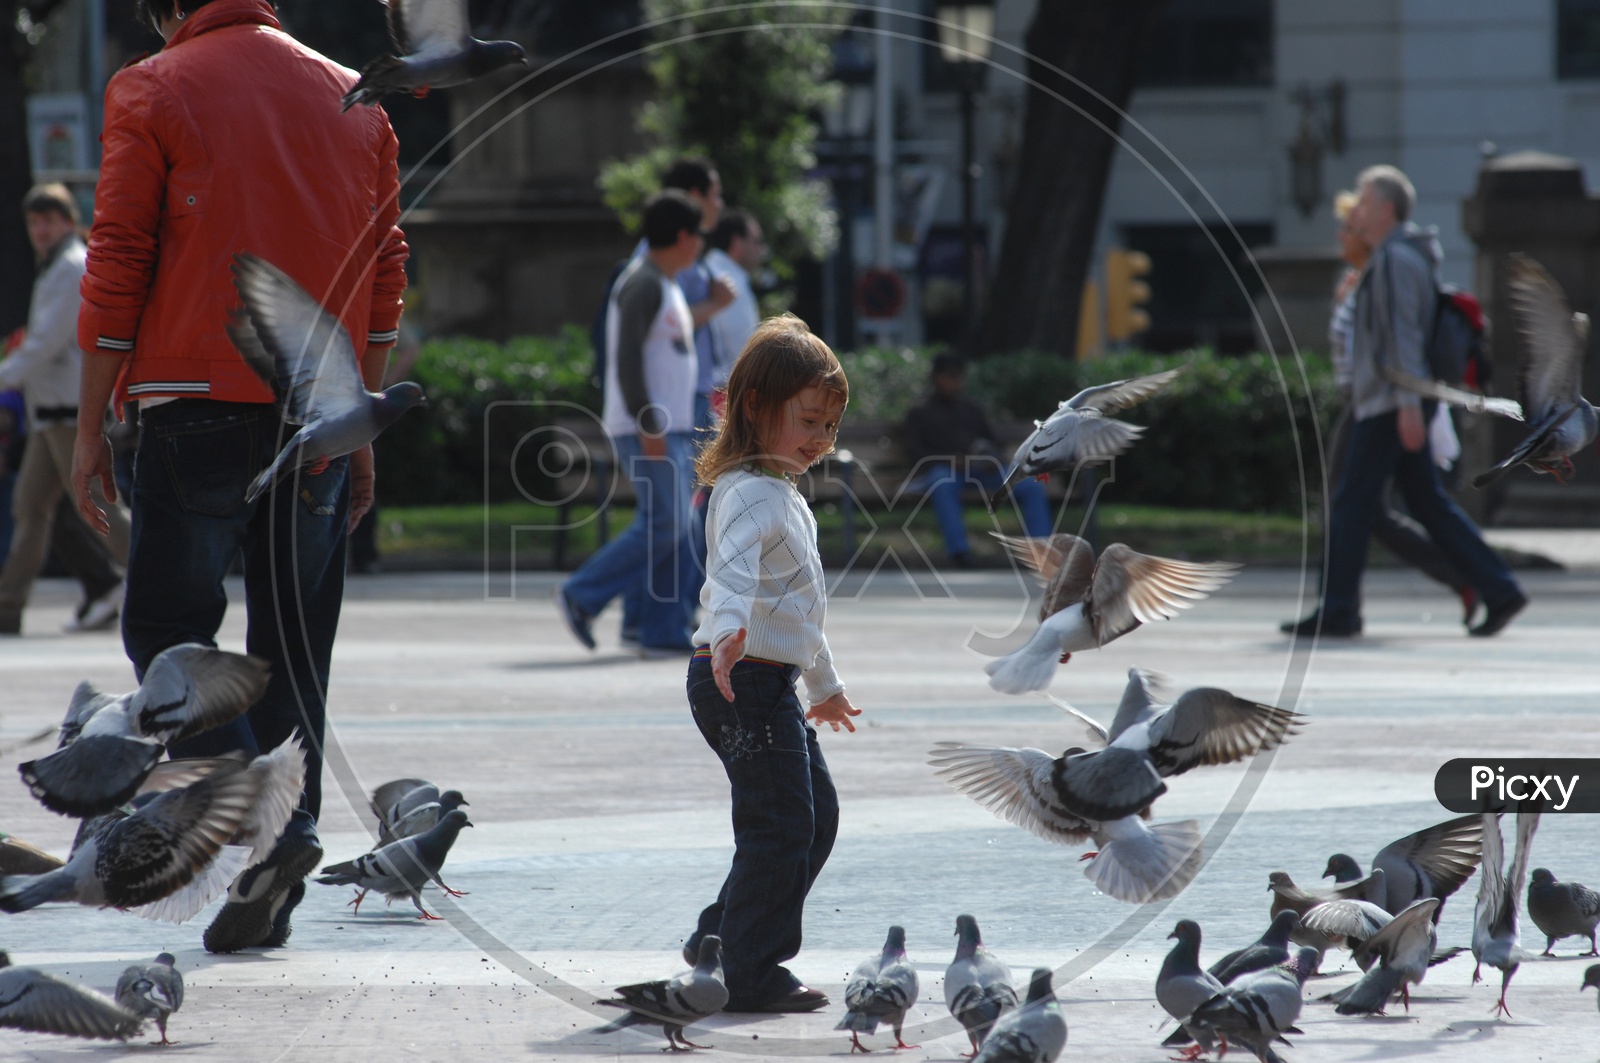 A Girl Child Playing With Pigeons on a Road